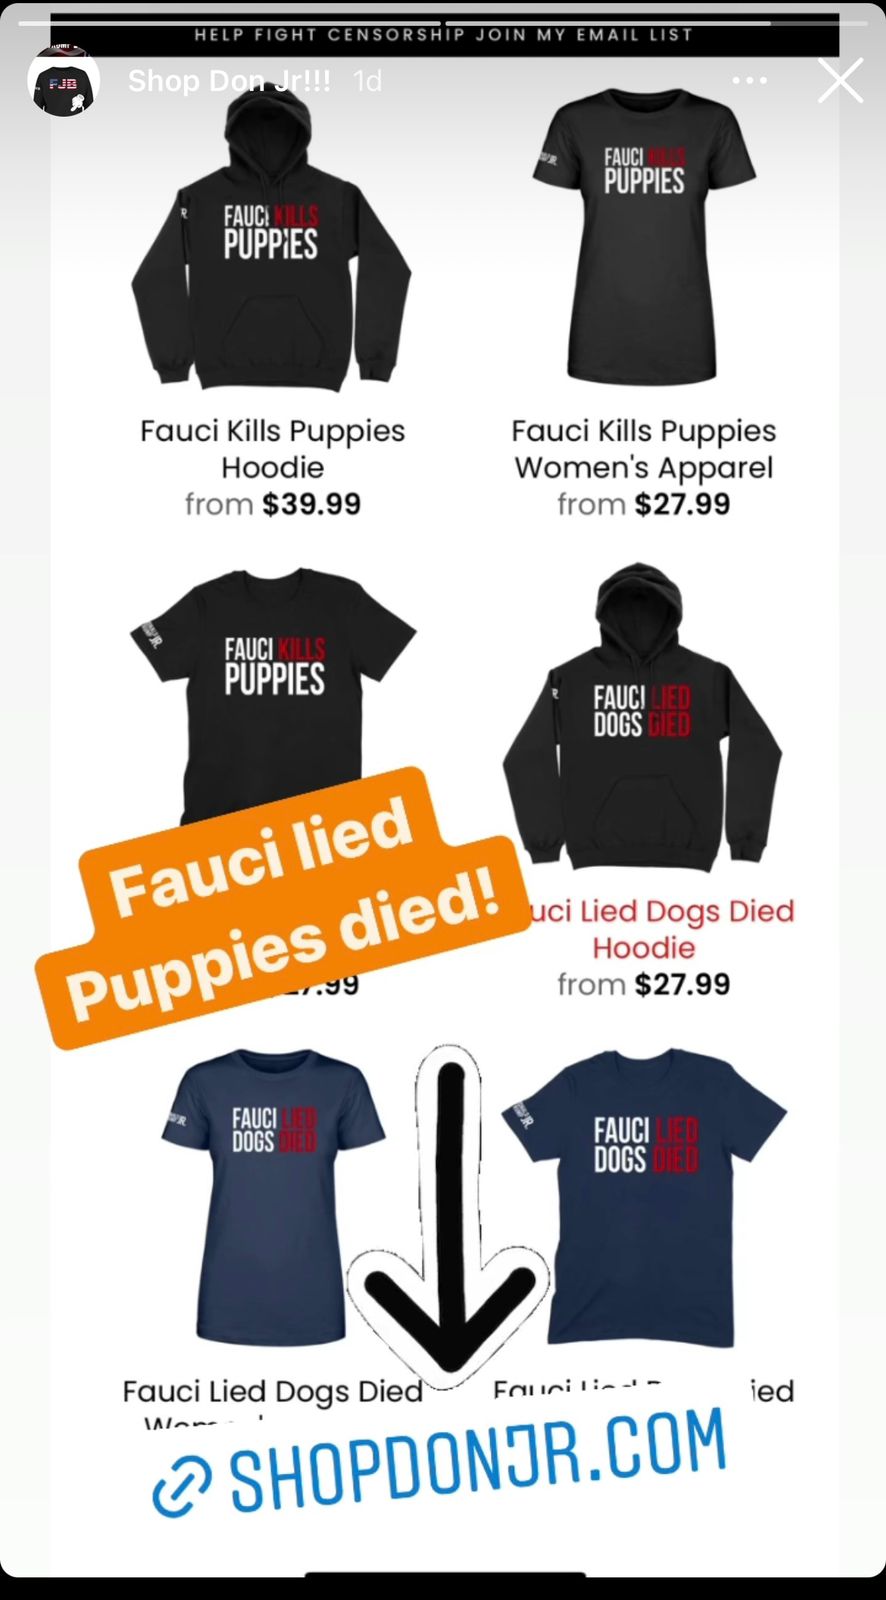 Donald Trump Jr’s Instagram stories advertise T-shirts and hoodies with captions such as: ‘Fauci lied, puppies died’ and ‘Fauci kills puppies’